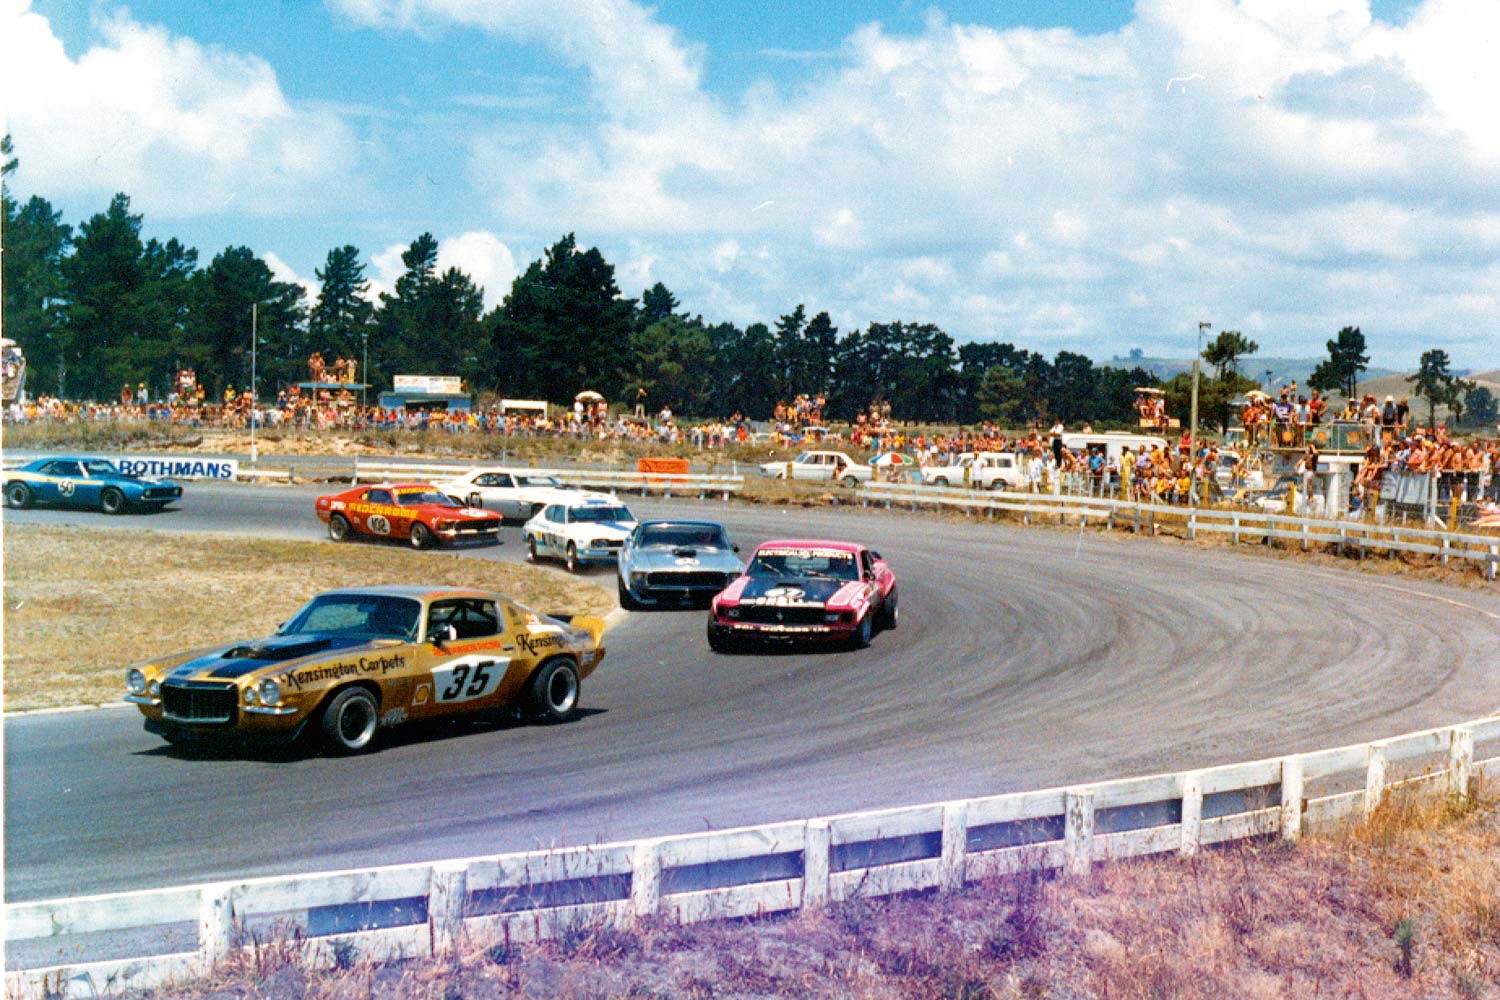 Bay Park big-bangers, with Red Dawson in the Camaro leading Graham Baker, Allan Moffat, Paul Fahey, Jim Richards, and Rod Coppins